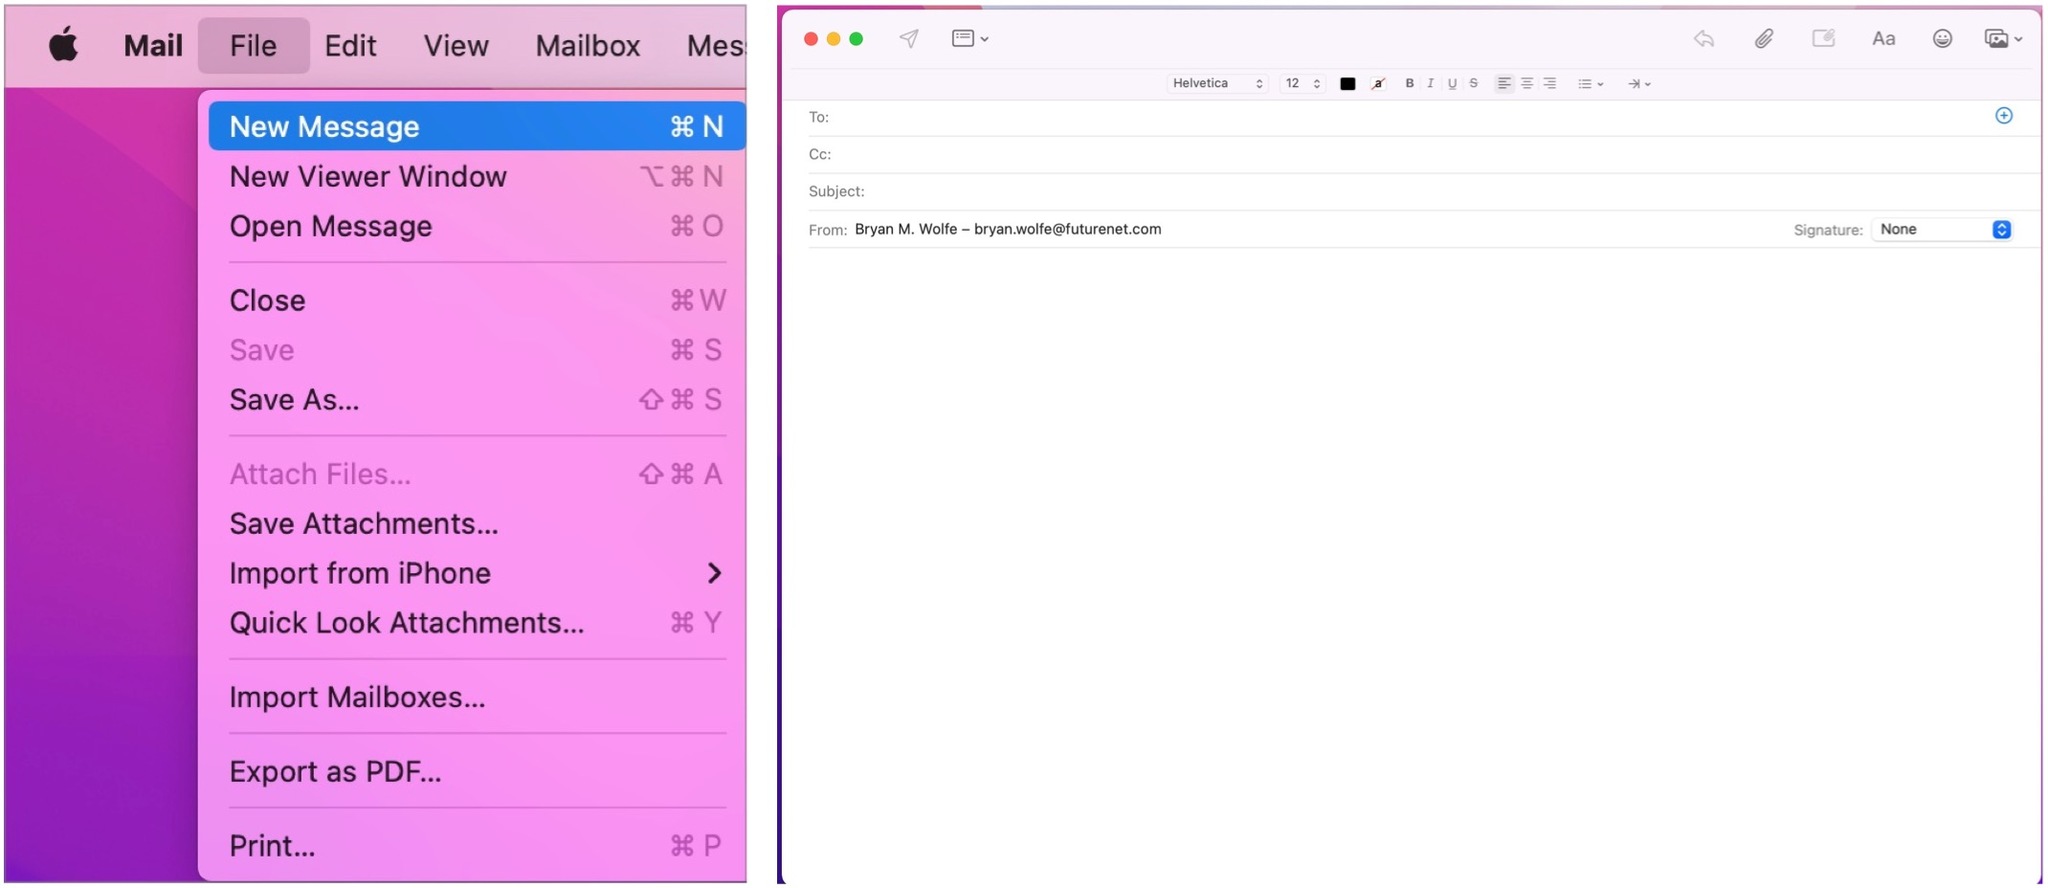 To create a new random email through the Mail application, open the application, and then start composing a new message.